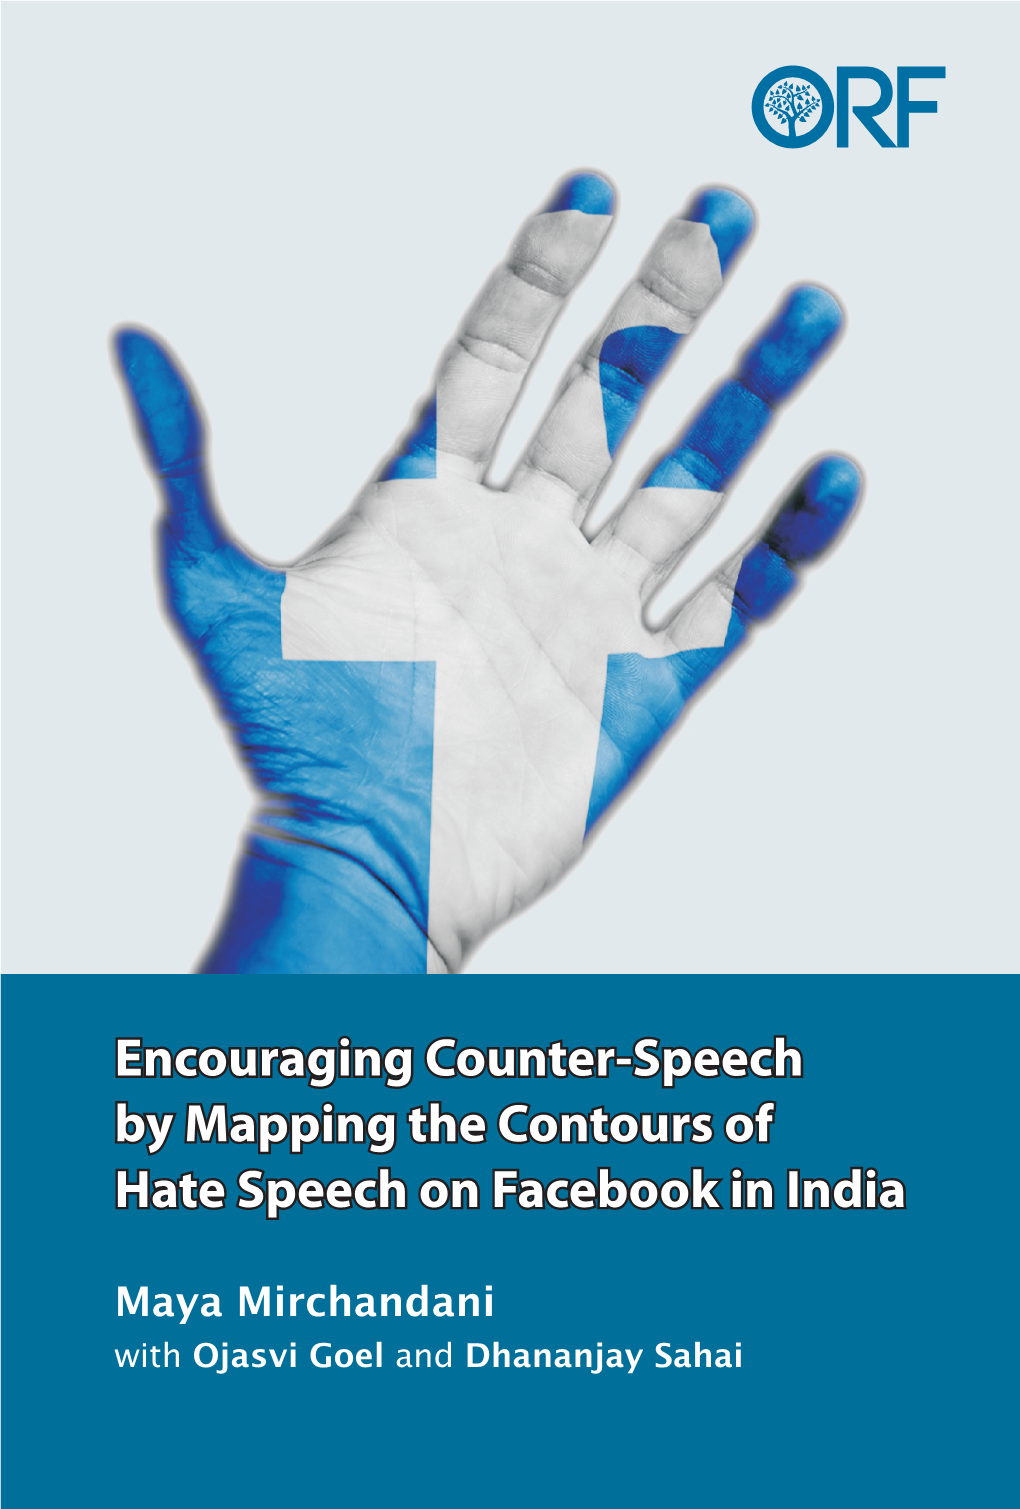 Encouraging Counter-Speech by Mapping the Contours of Hate Speech on Facebook in India